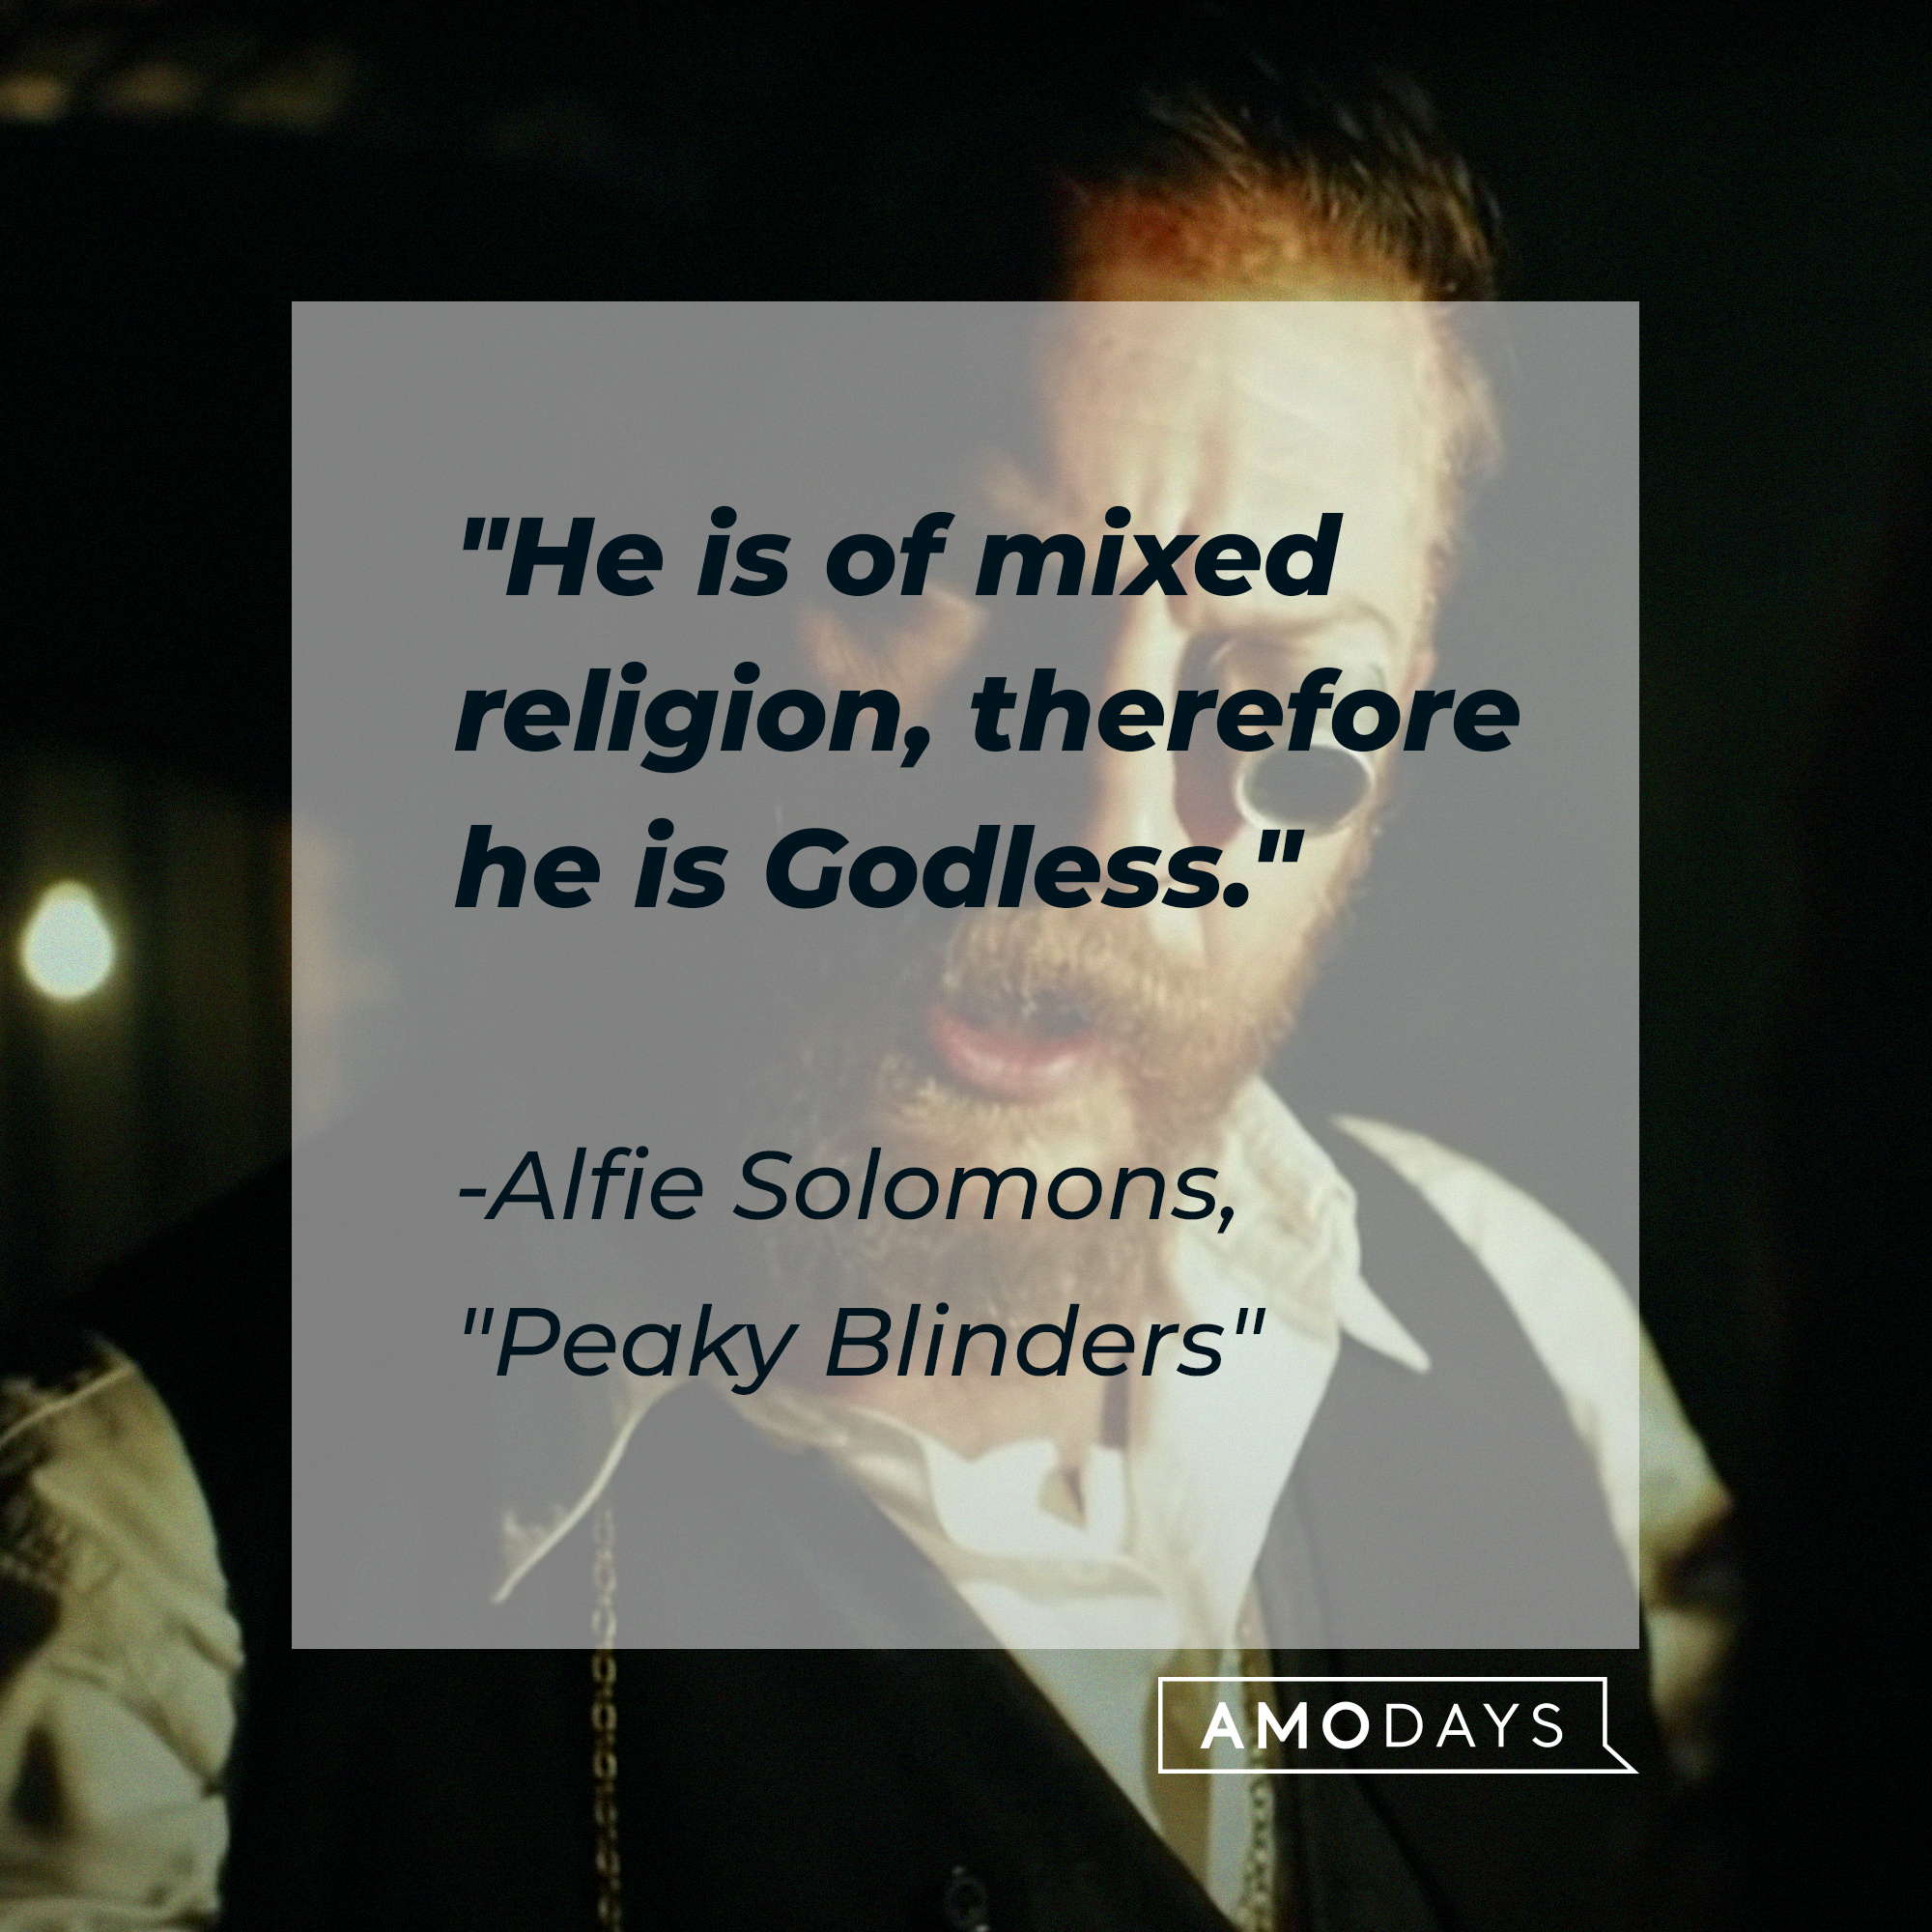 Alfie Solomons’s quote: "He is of mixed religion, therefore he is Godless." | Source: facebook.com/PeakyBlinders